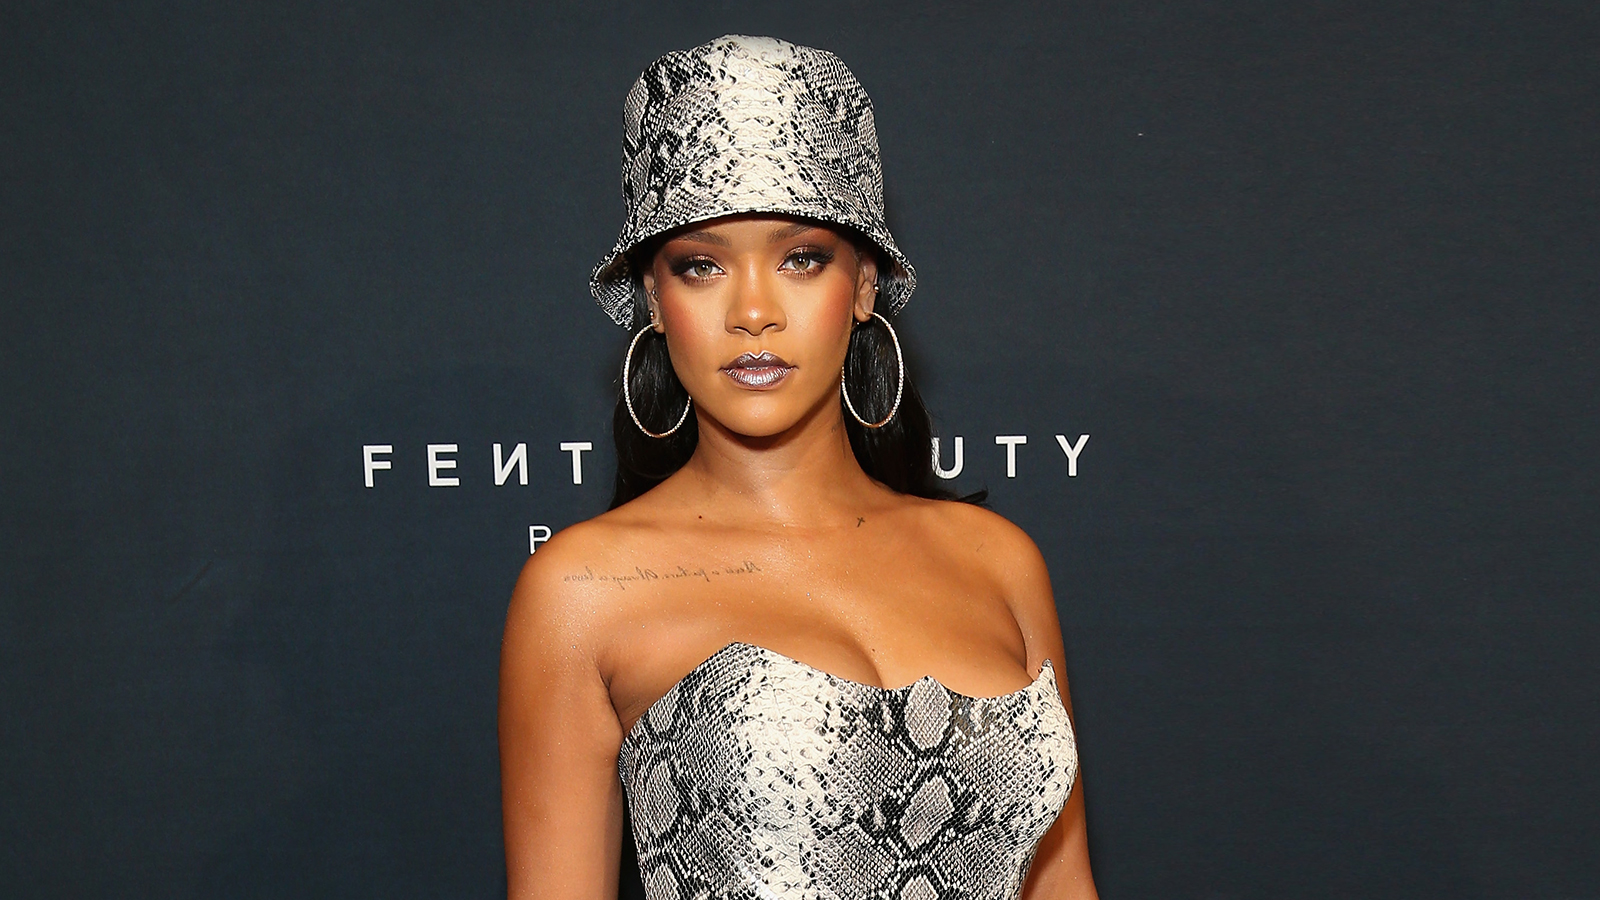 Appropriate silence benefit Rihanna's Best Style Moments: Fashion Evolution Photos